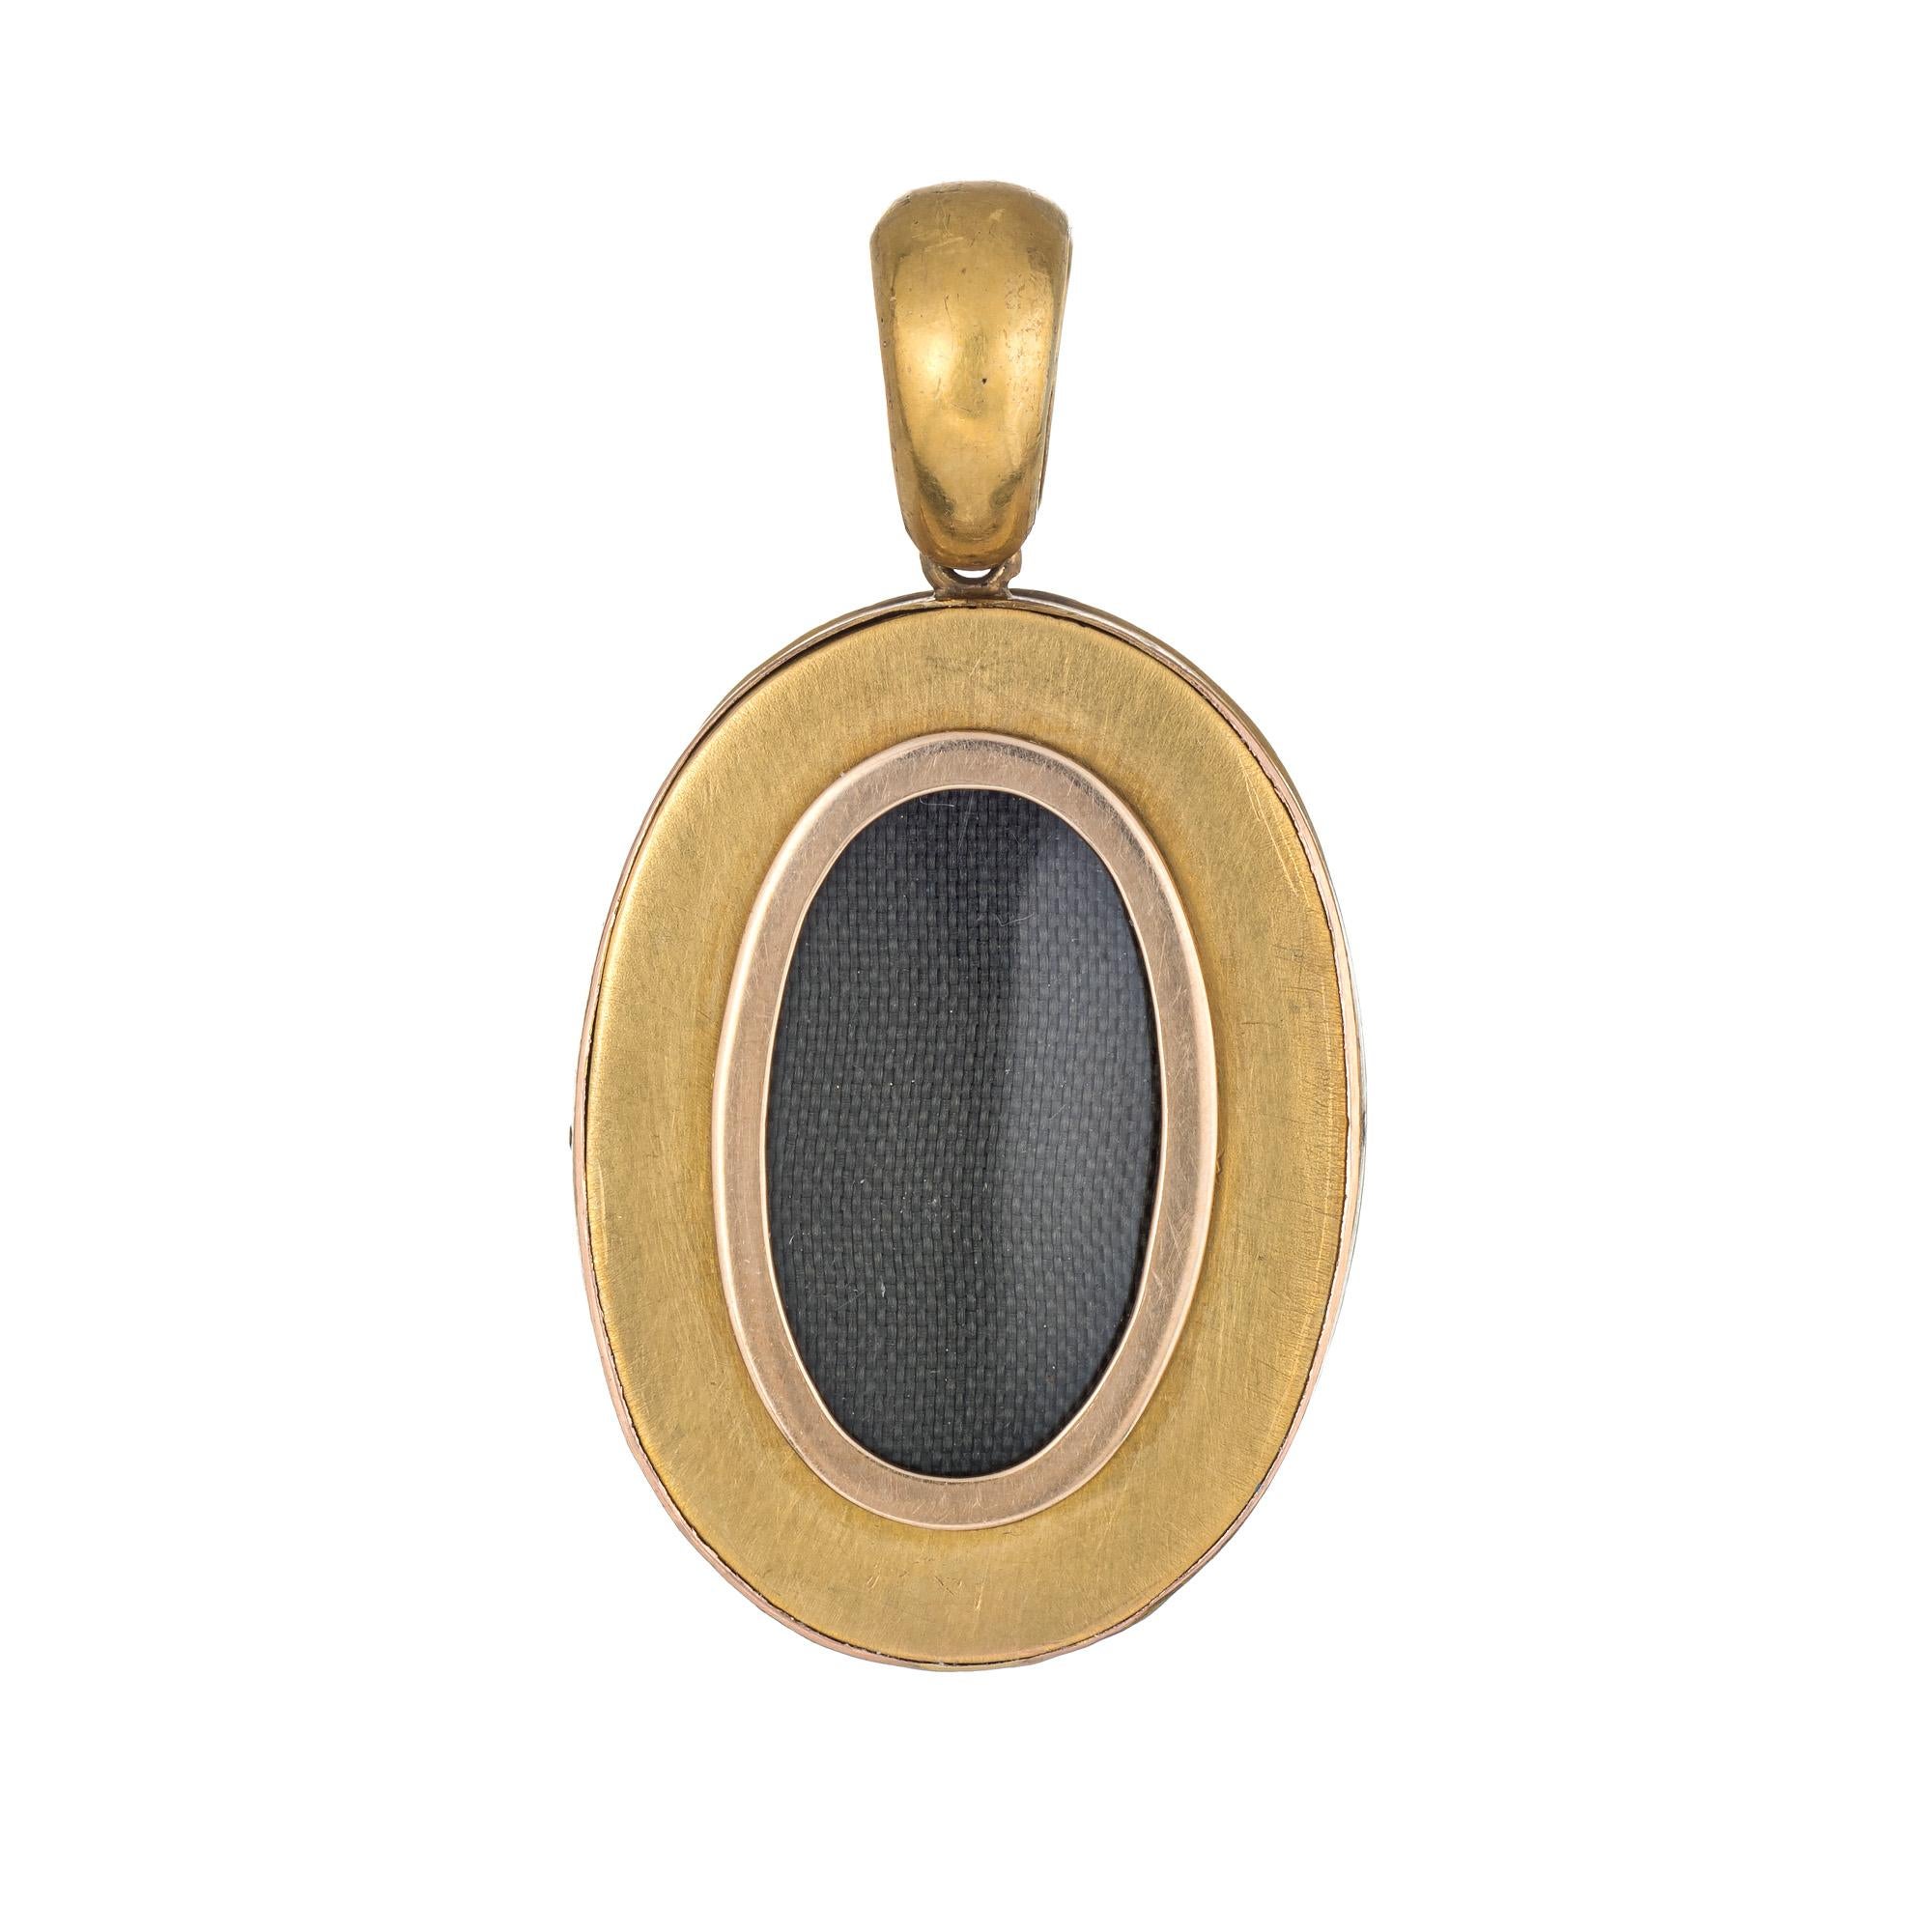 Elaborate antique Victorian pendant (circa 1860s to 1880s) crafted in 18 karat yellow gold. 

29 natural pearls each measure (average) 2mm. The pearls are in-tact and appear to be original to the pendant. 

The beautifully detailed pendant depicts